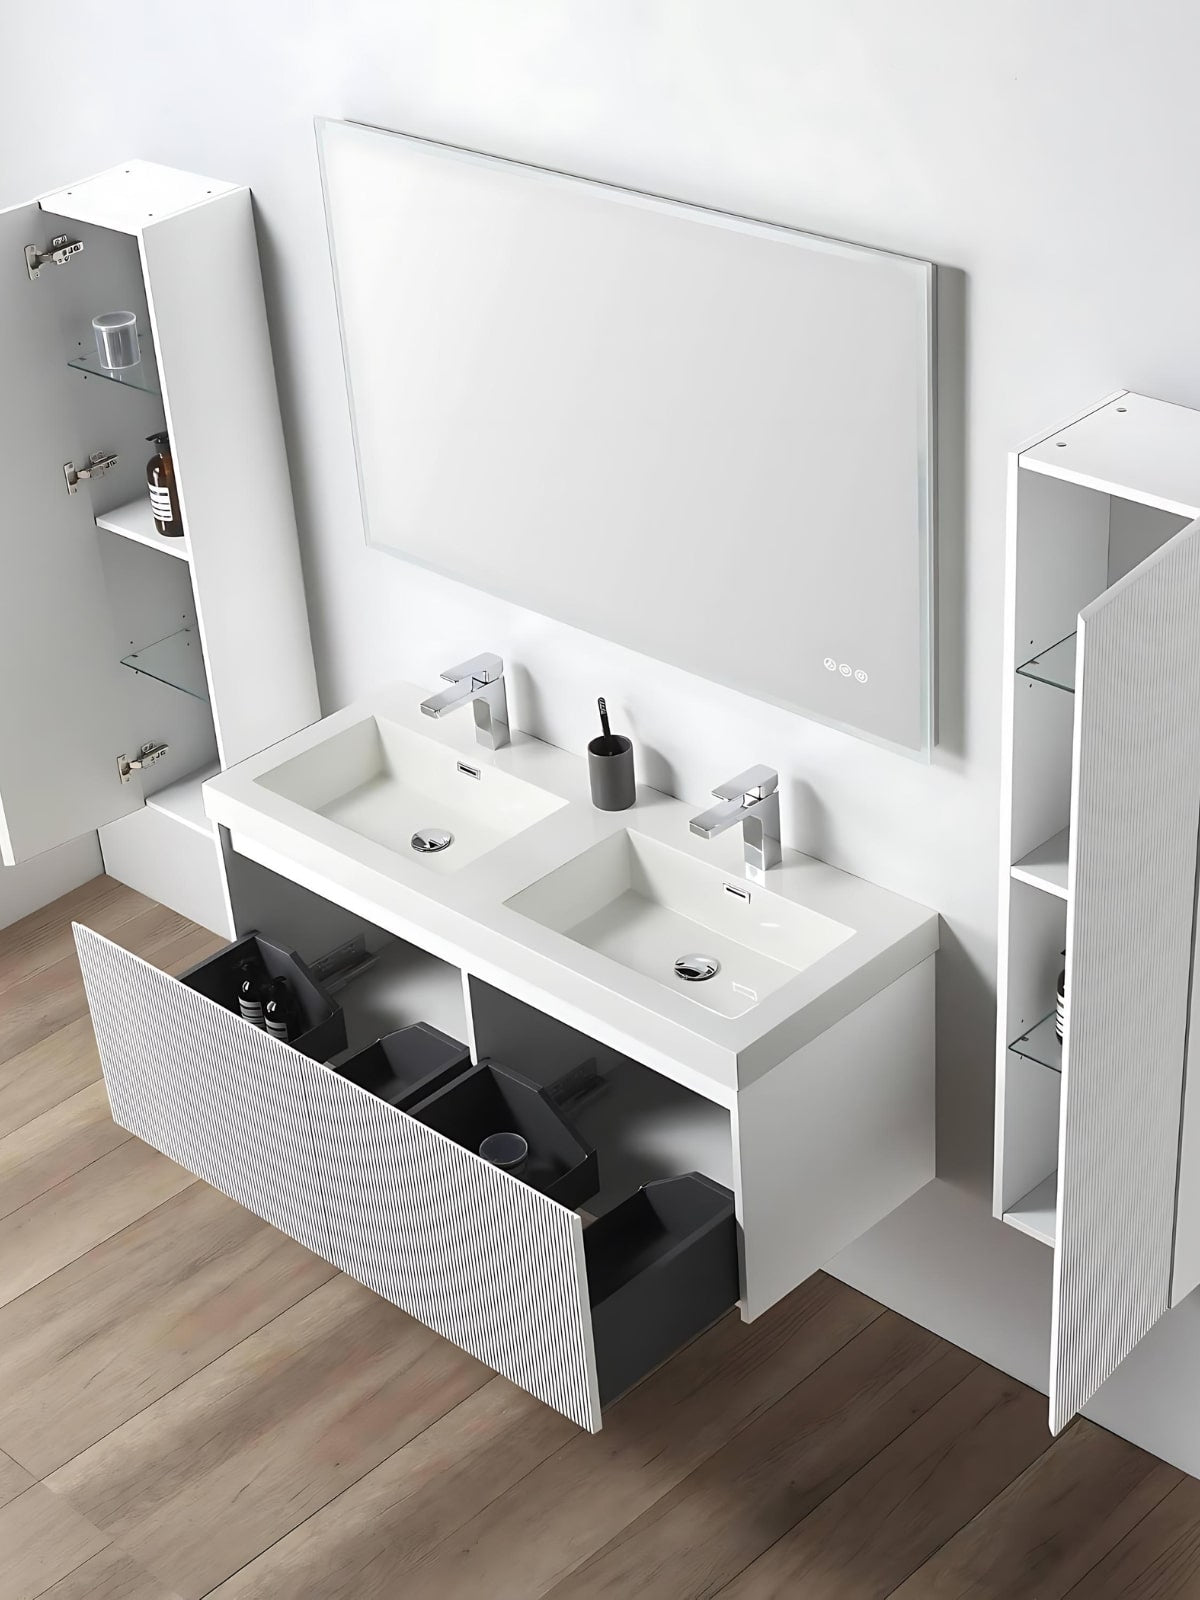 Picking a wooden floating vanity is the easiest choice for your next bathroom remodel